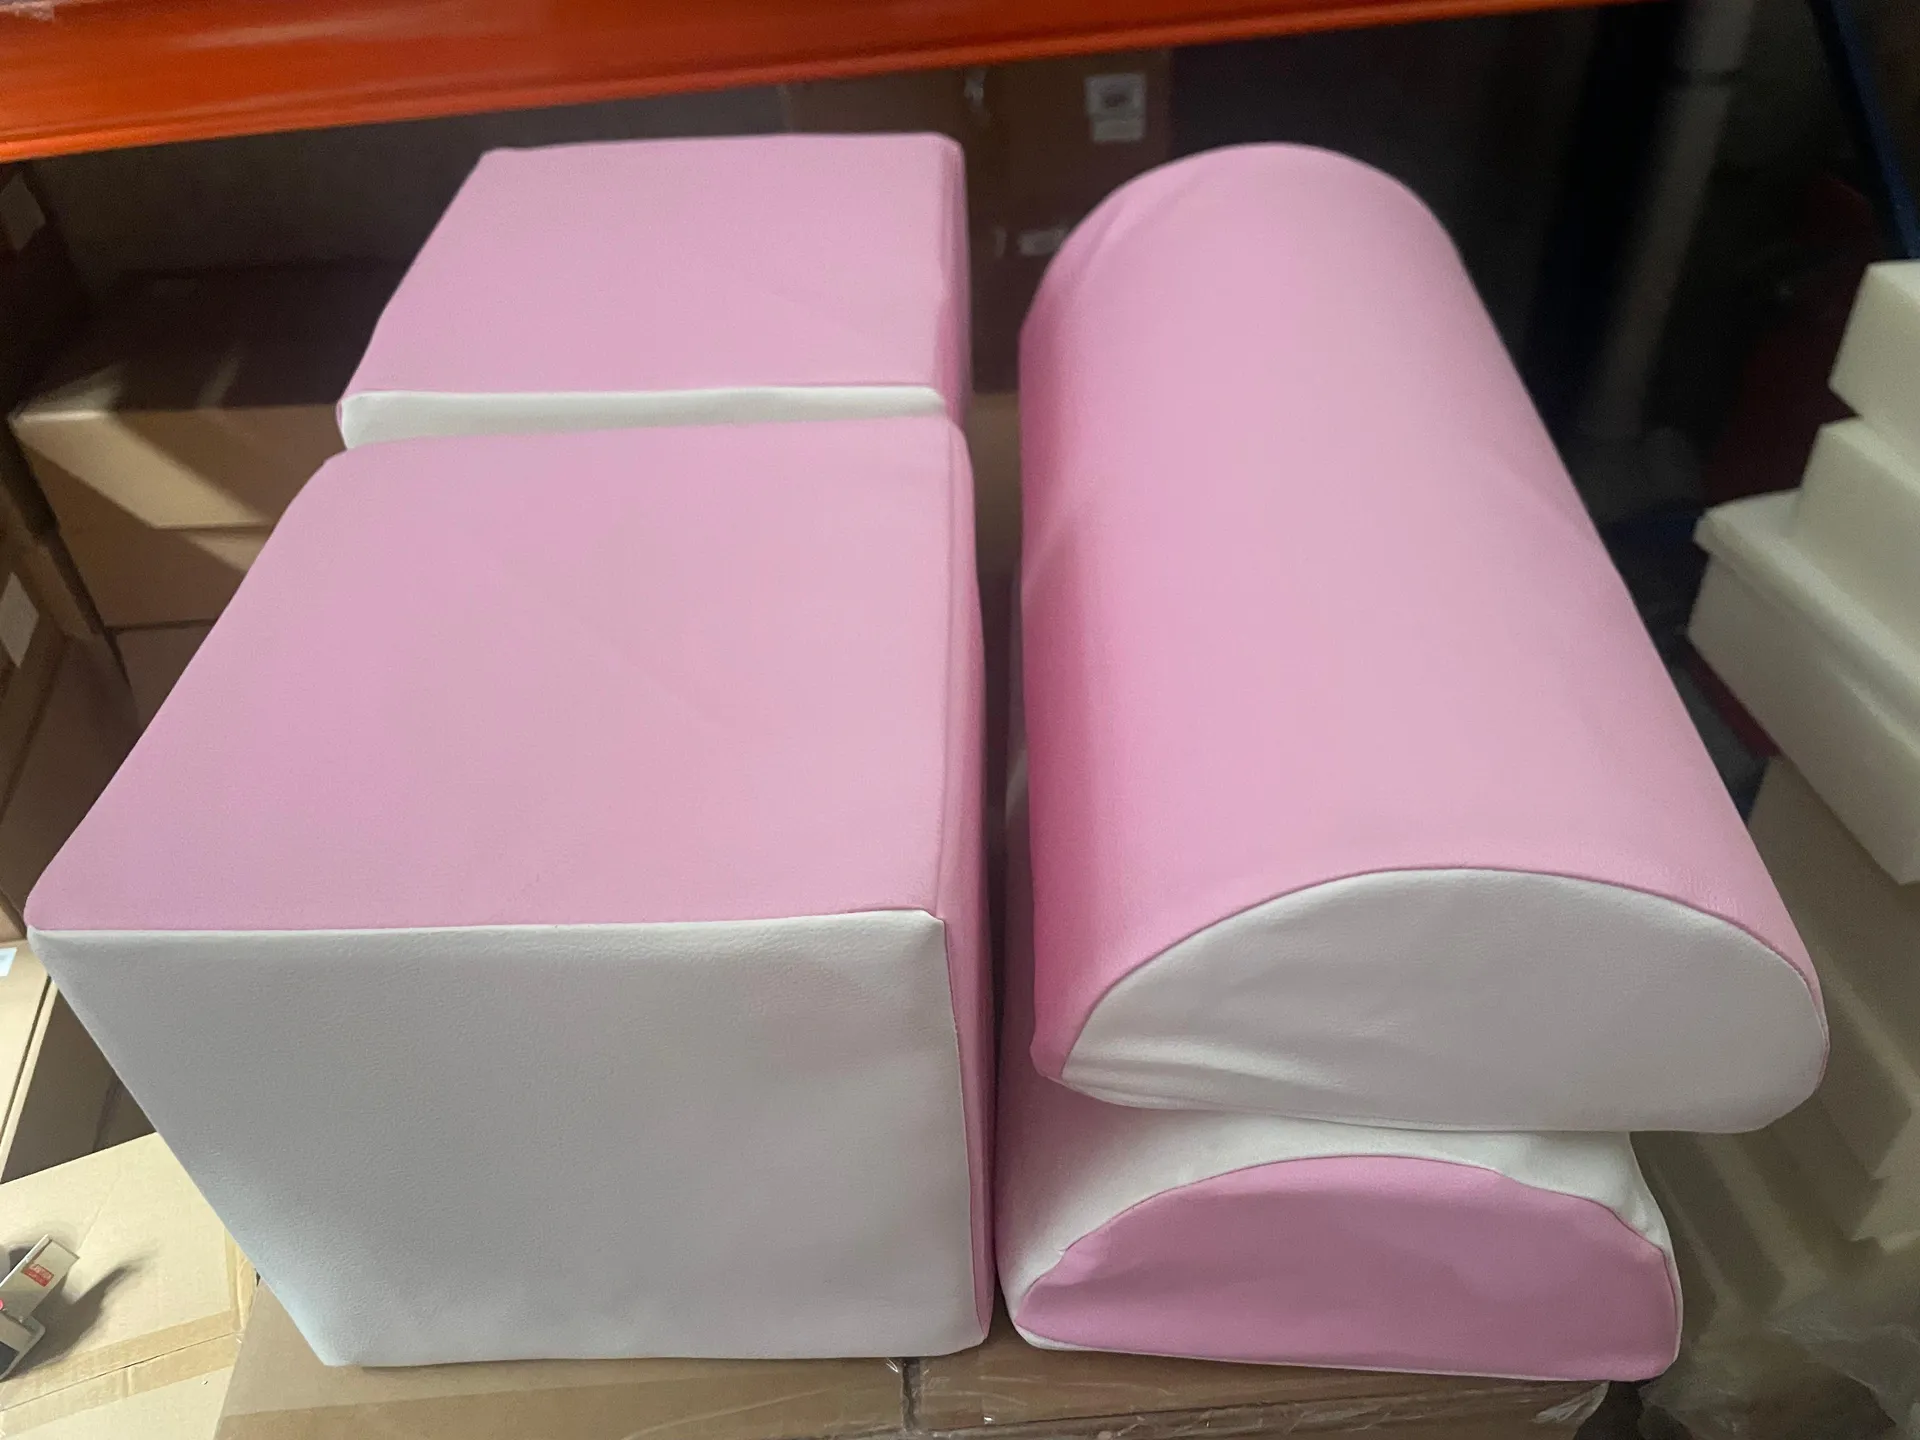 CLEARANCE - Pink & White Castle - 4 pieces